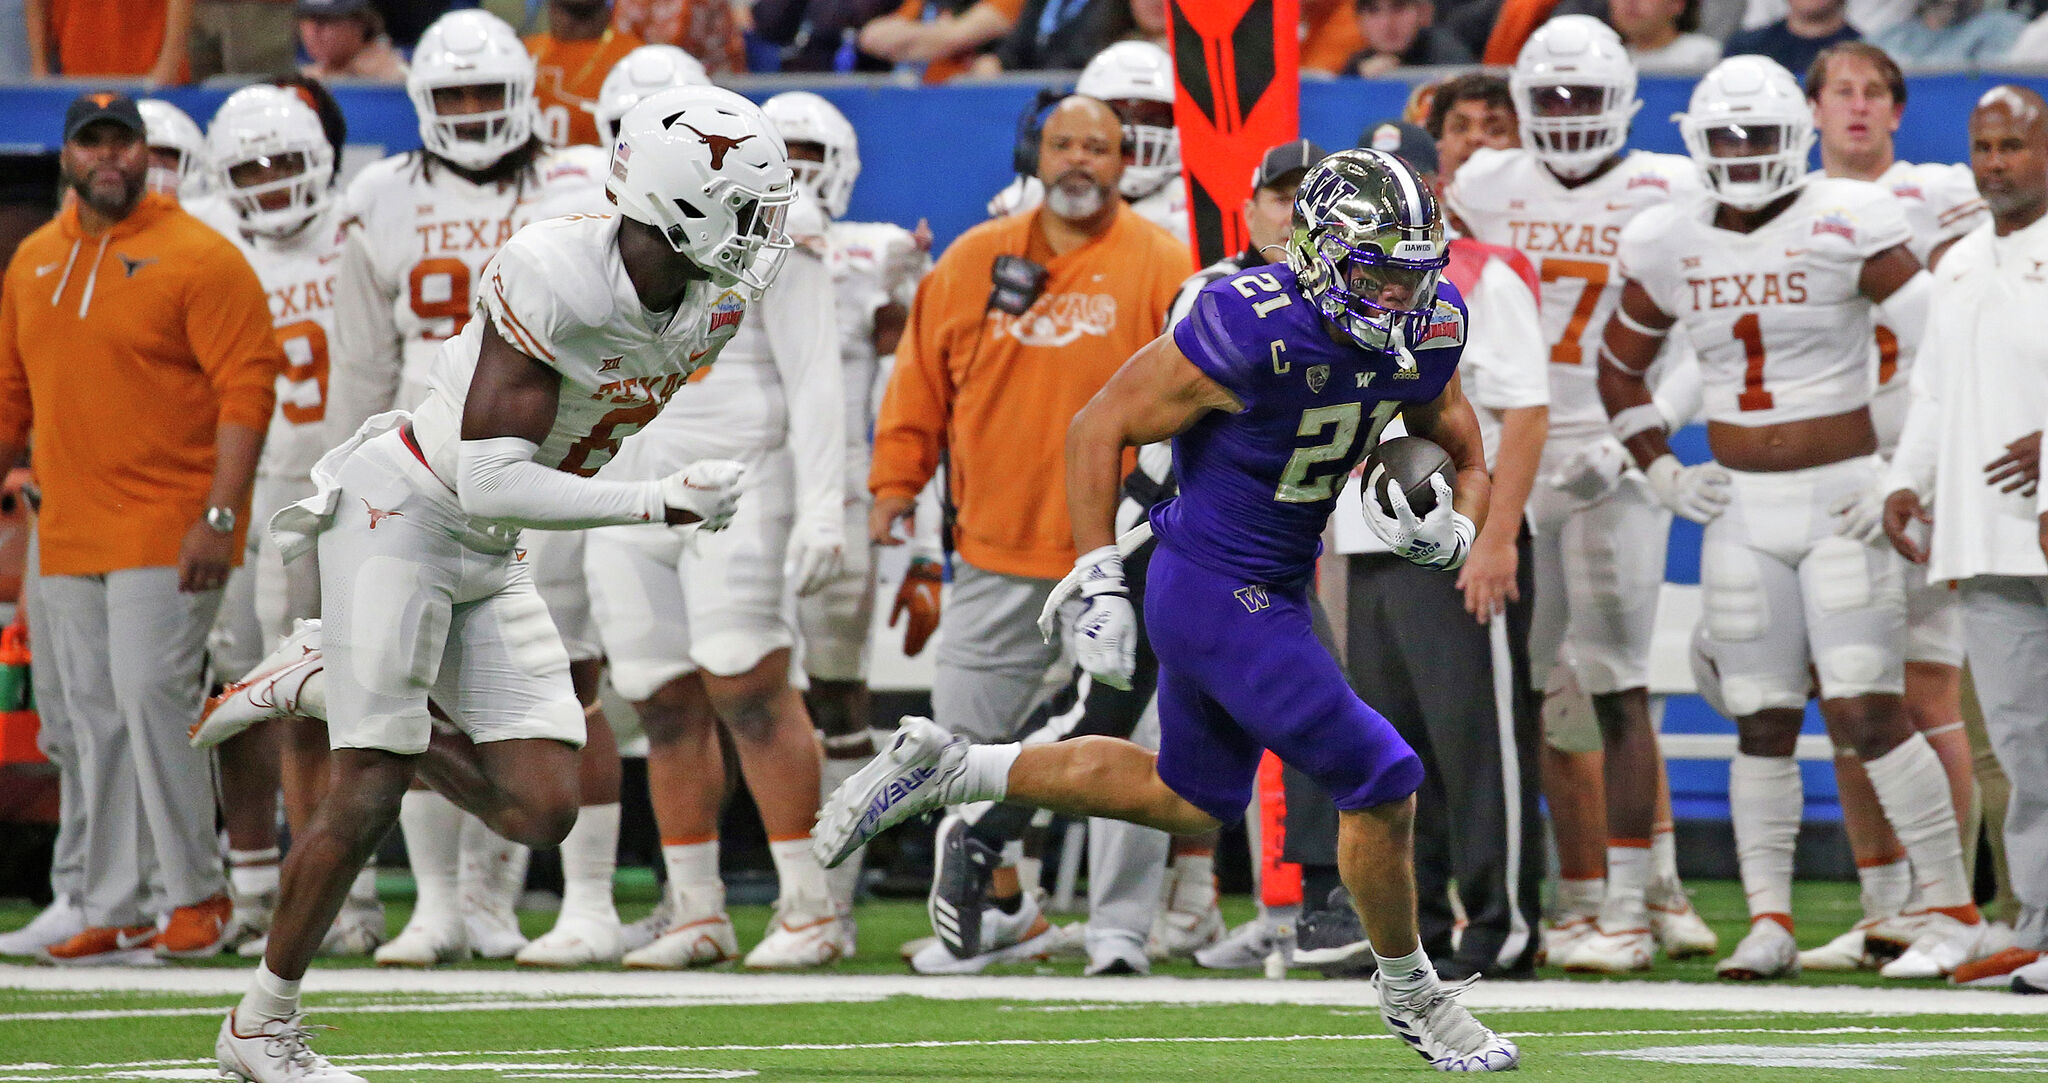 Not so burnt orange? Longhorn fans throwing shade over shade of